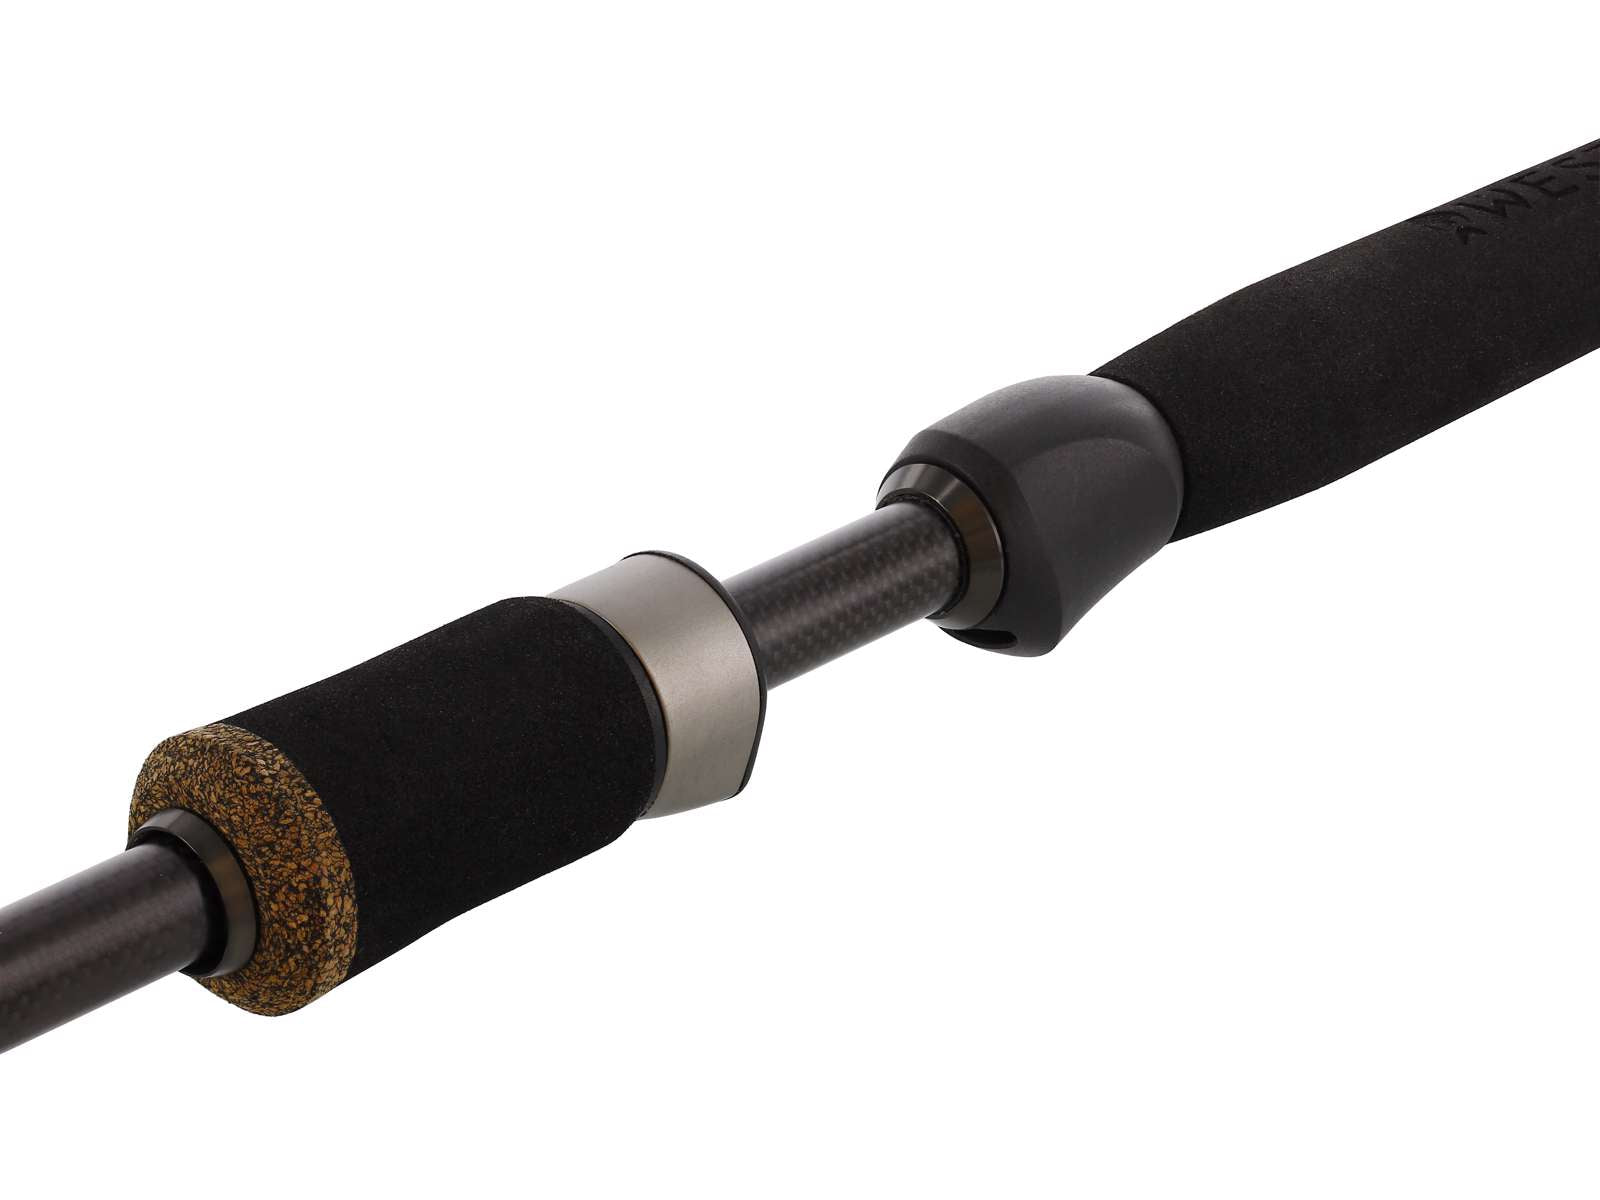 Savage Gear Sg4 Light Game Rods - New 2021